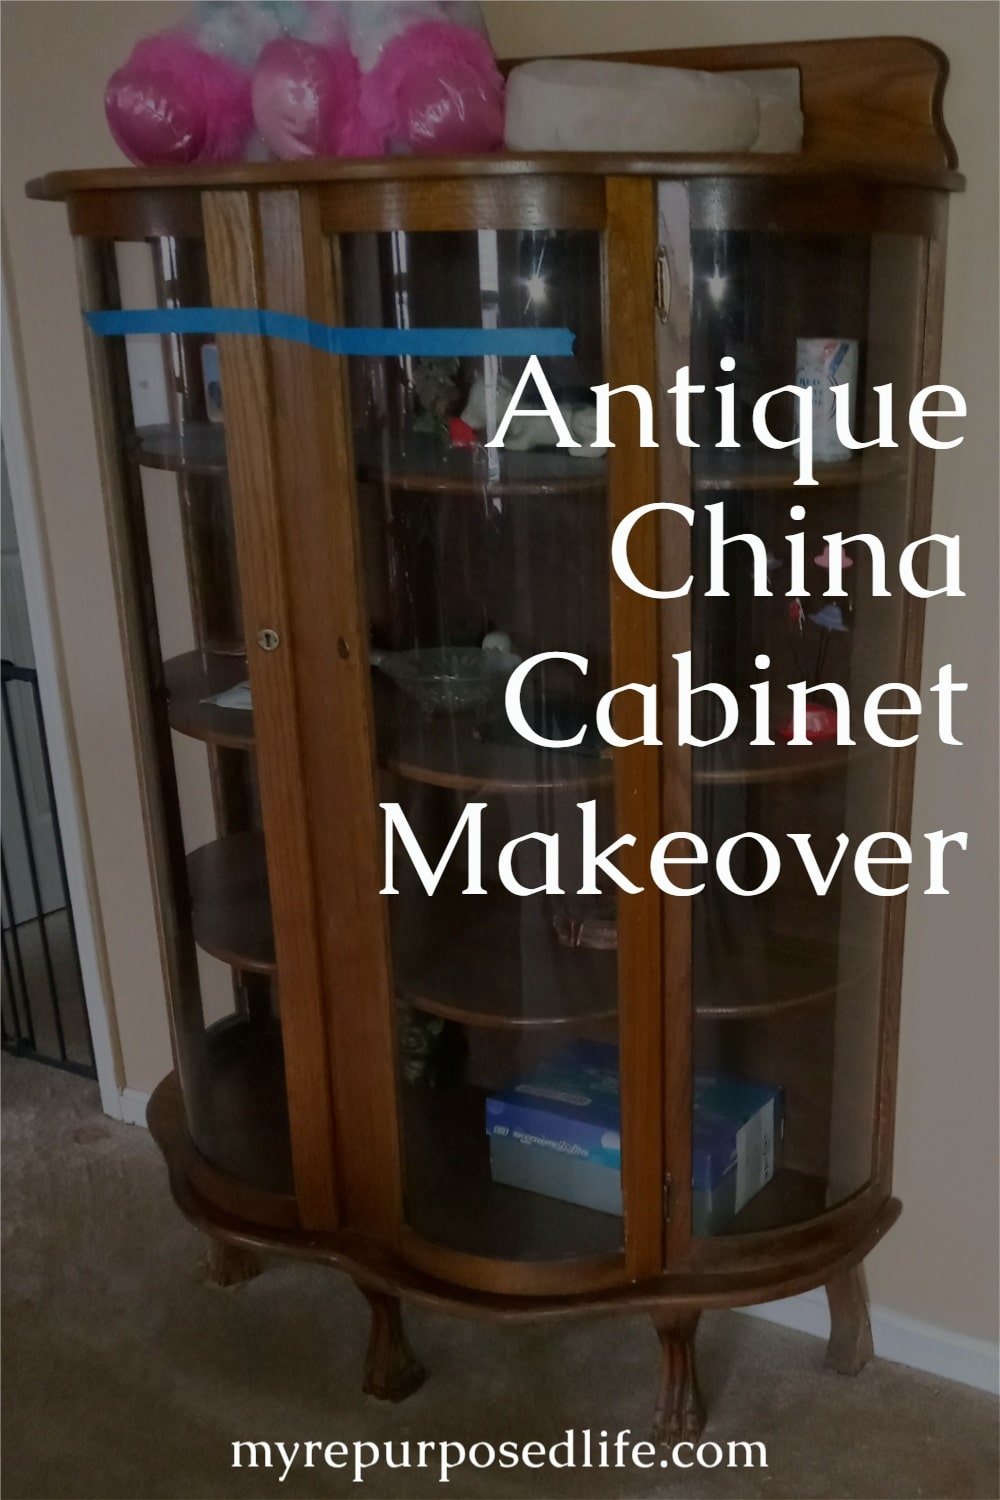 An outdated antique china cabinet gets a new lease on life with paint and some TLC. The curved glass is a bonus! Tips on painting and repairs. #upcycled #MyRepurposedLife #chinacabinet #antique #painting via @repurposedlife